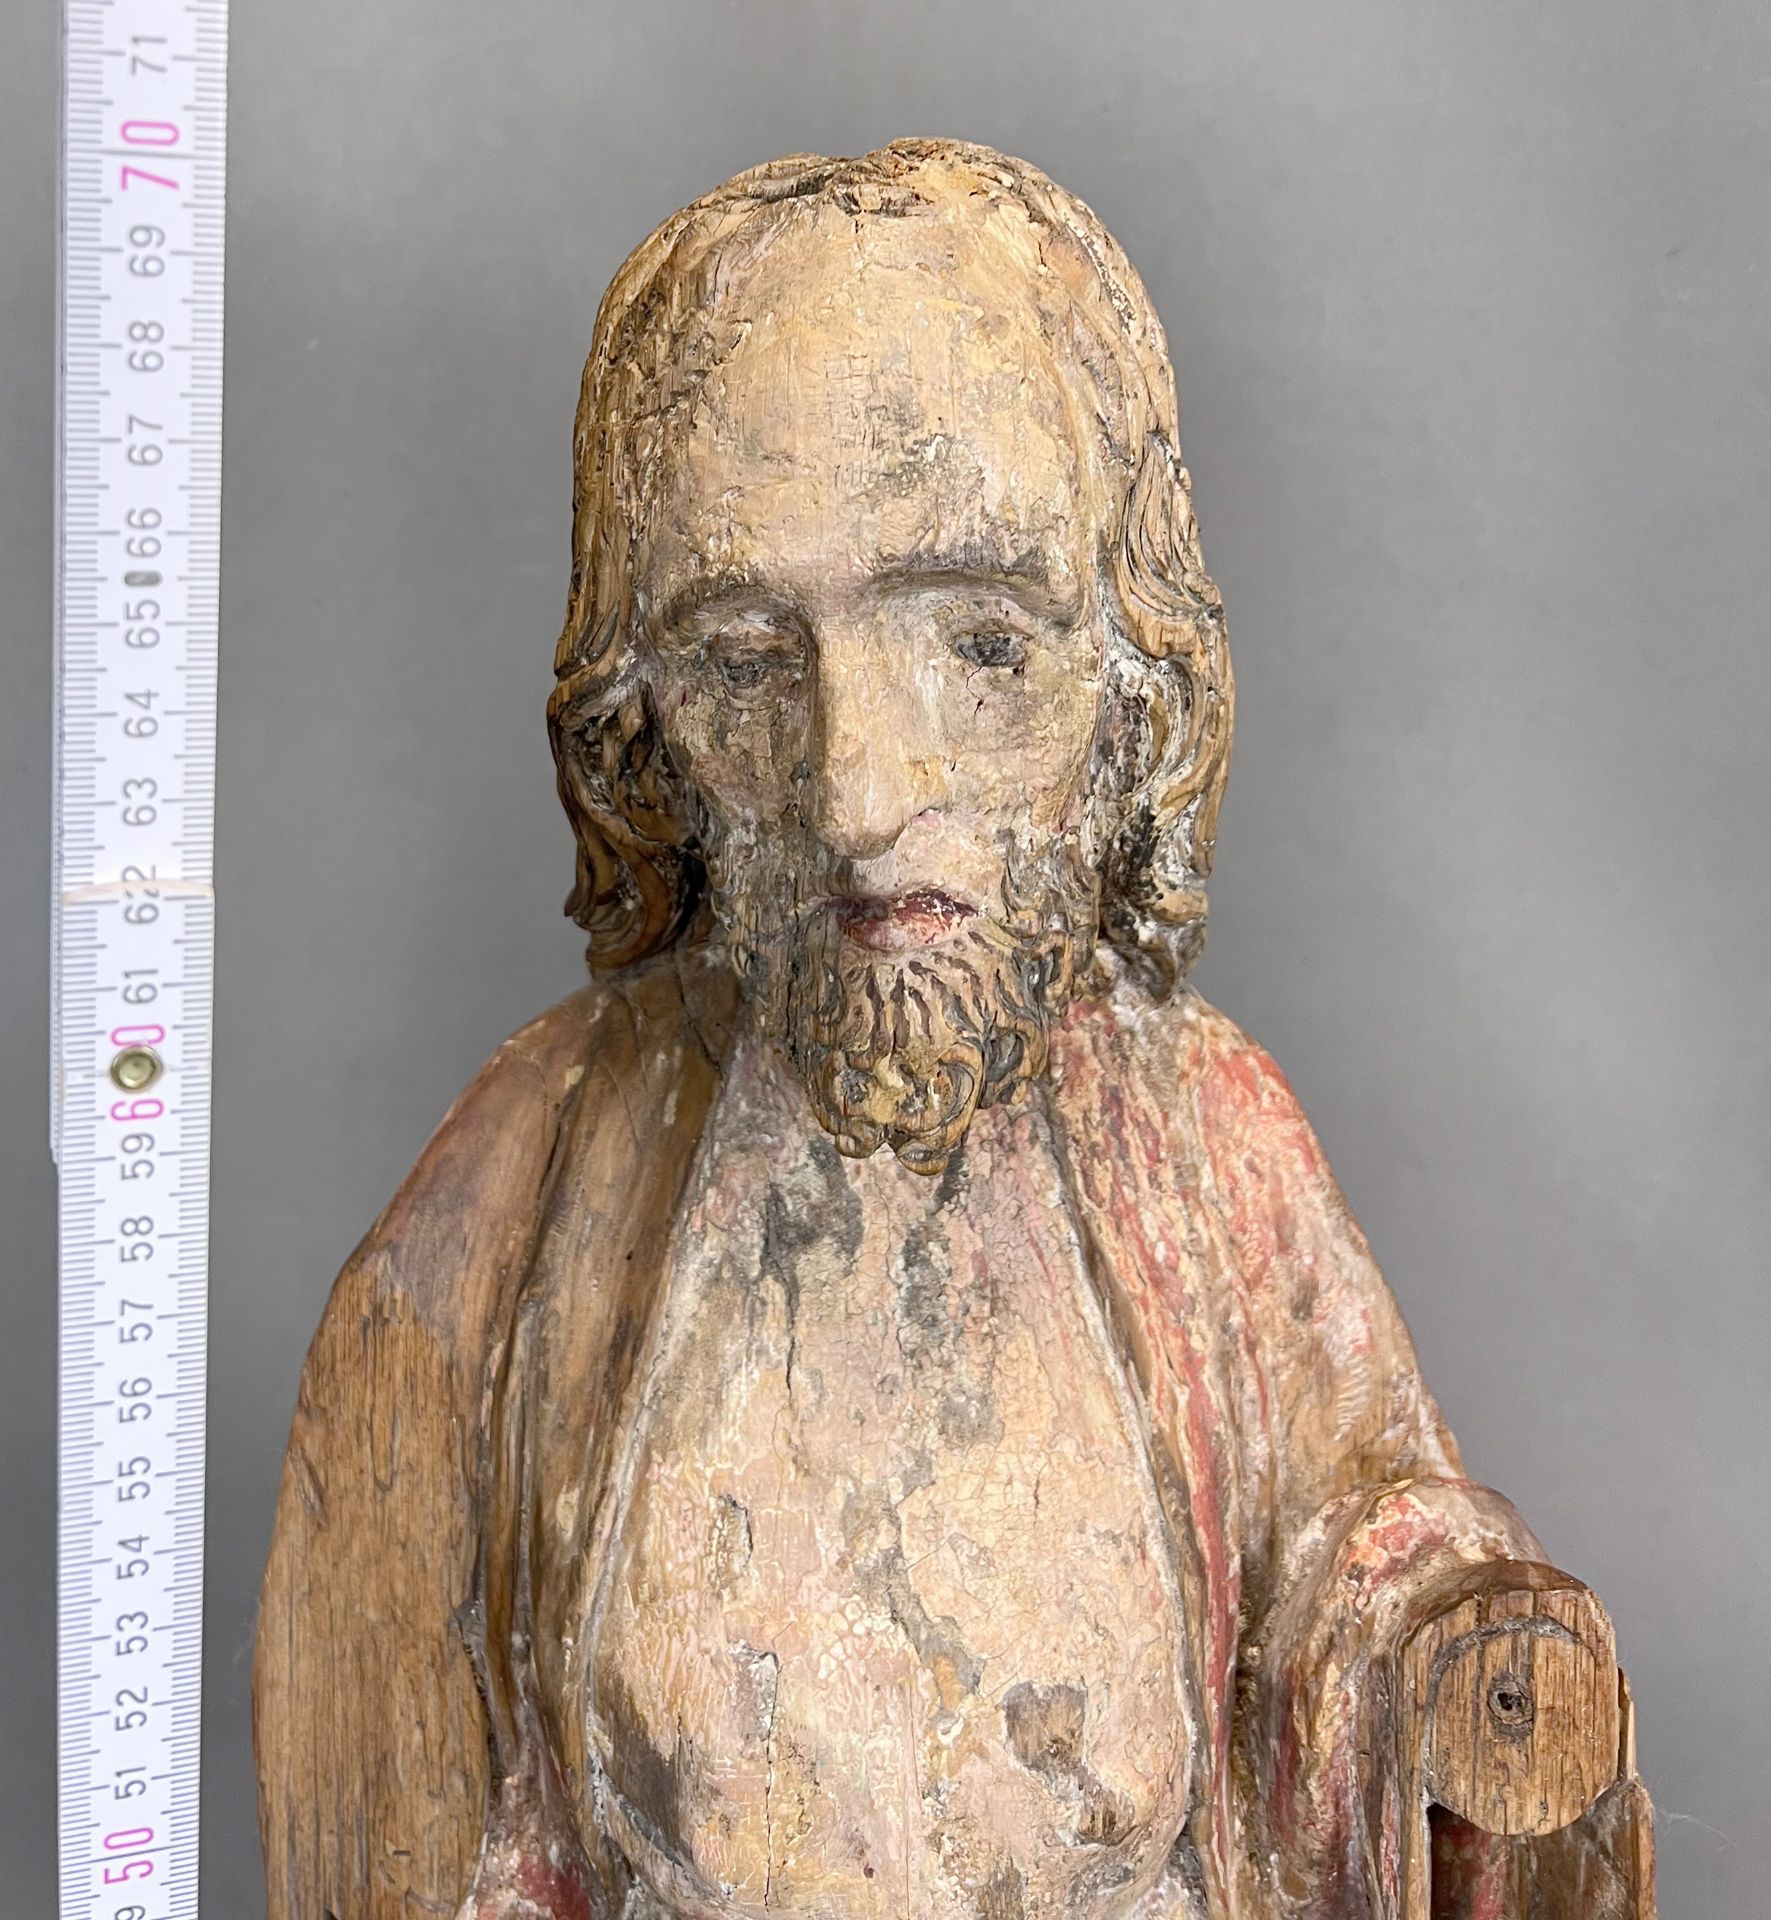 Wooden figure. Christ. Gothic style. Mid 15th century. Lower Rhine. - Image 13 of 15